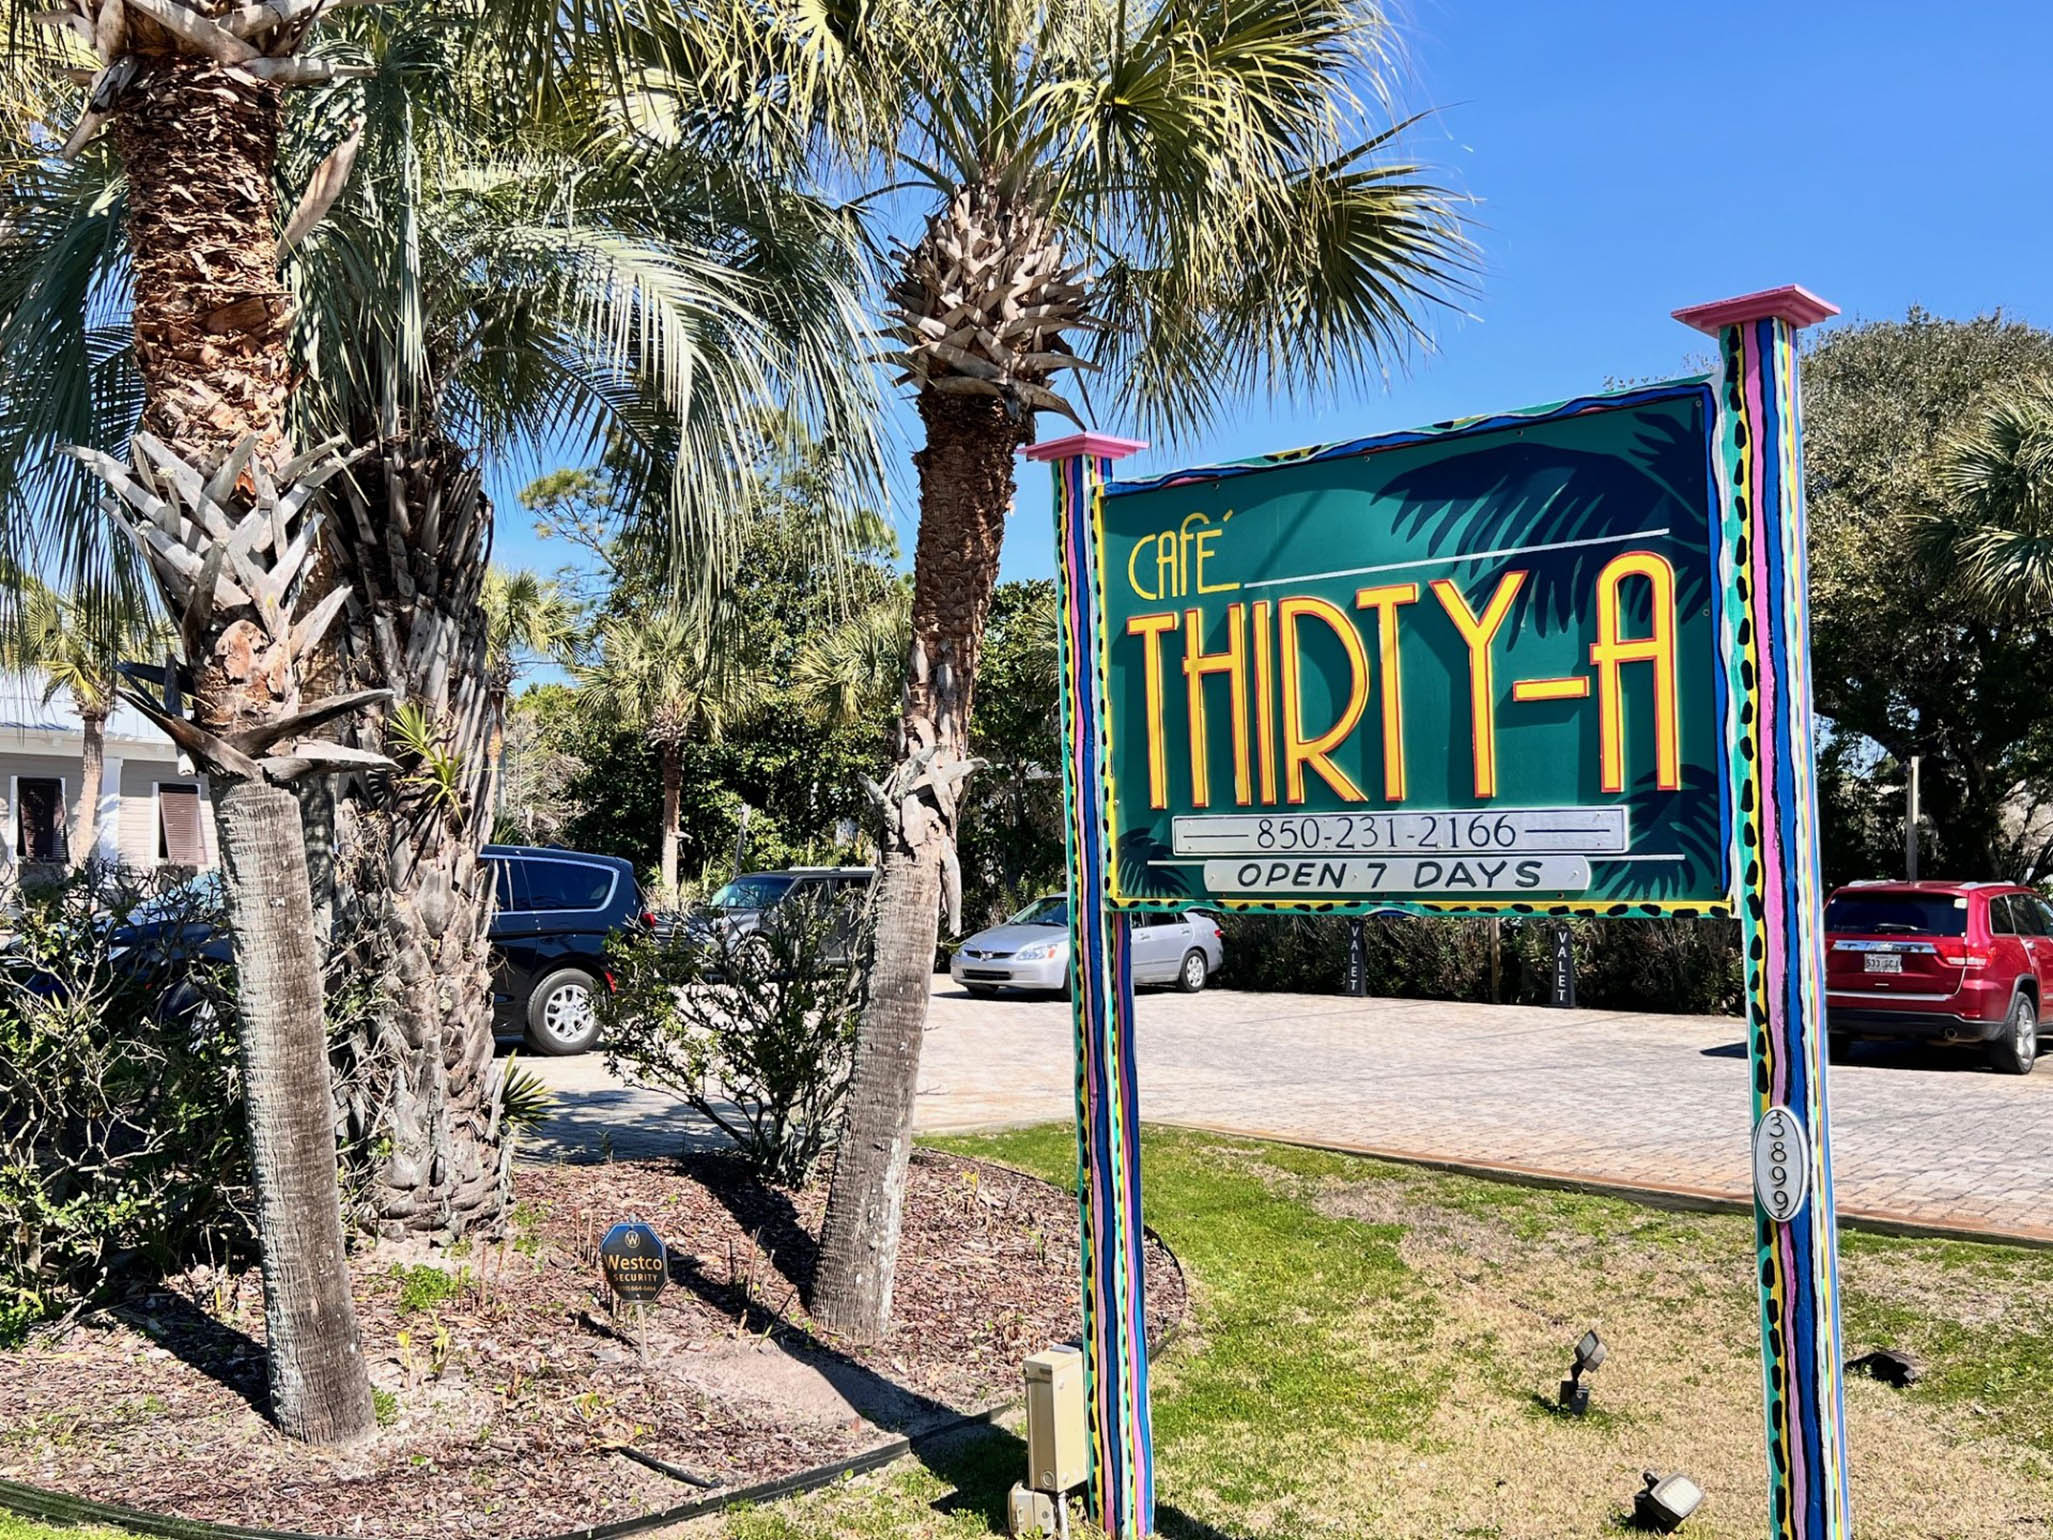 Thirty A Cafe' Seagrove